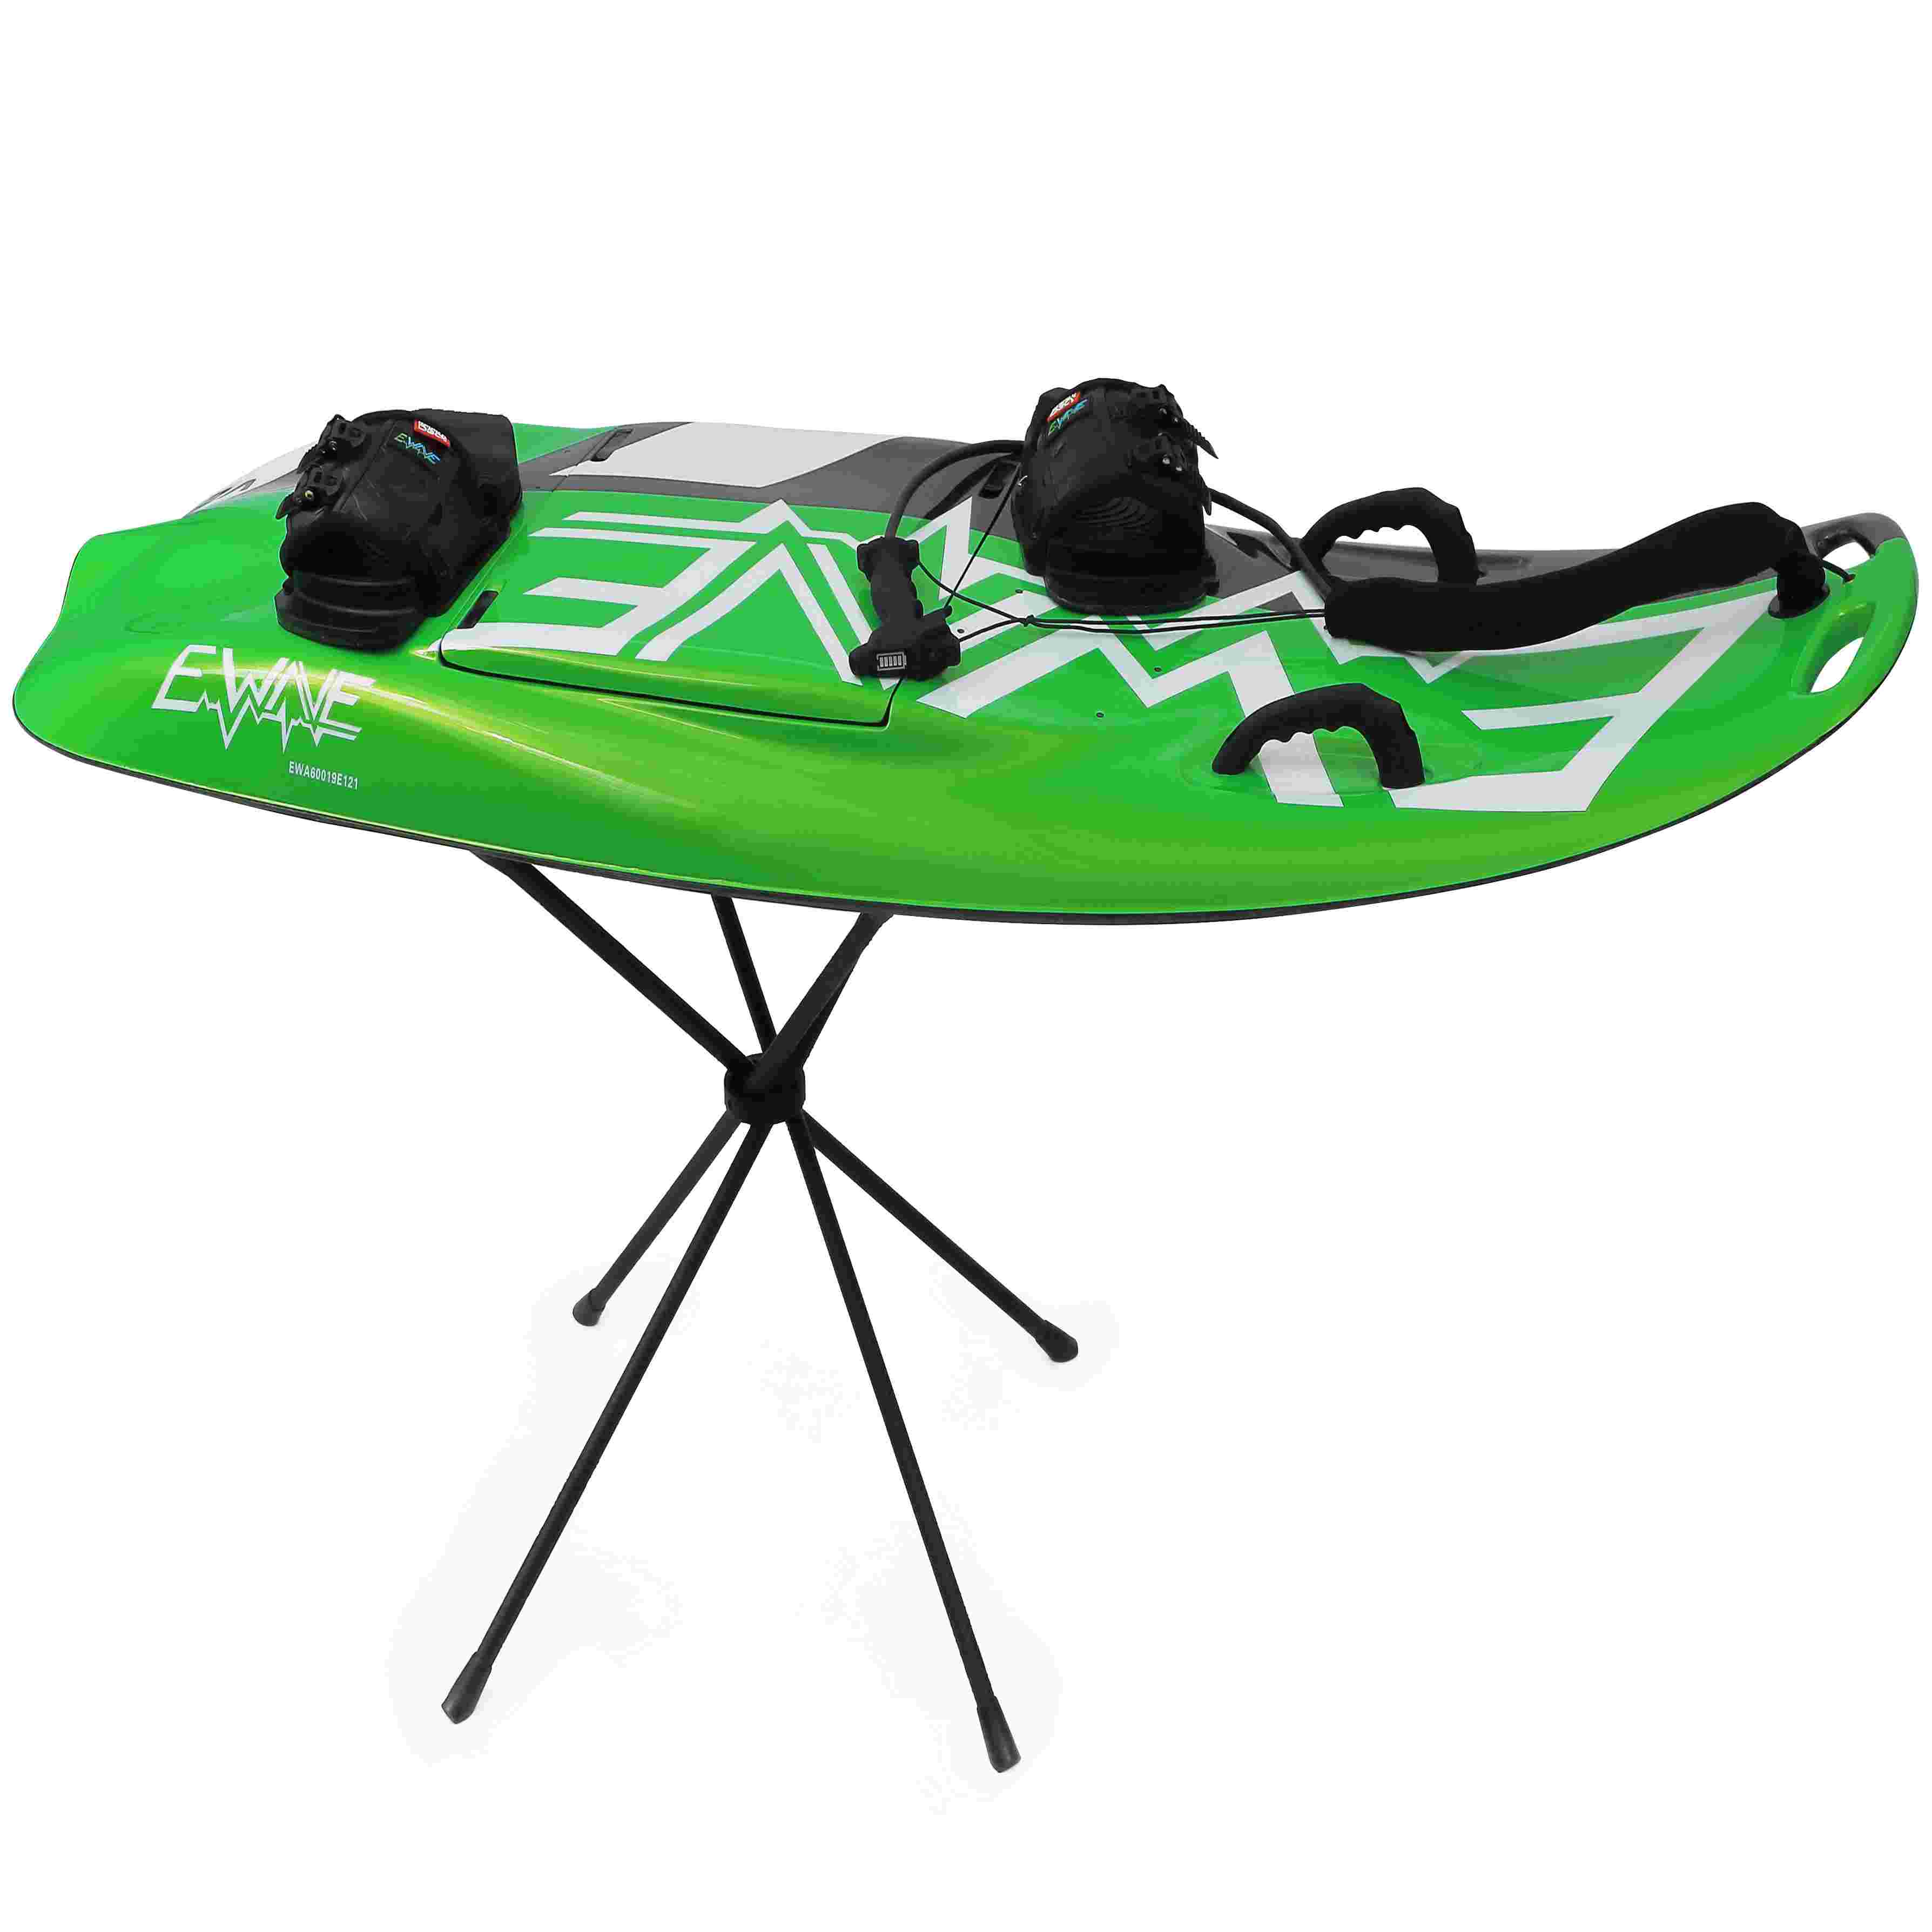 EWAVE Electric Stand Up Surfboard,V2-6000, surfboard with motor